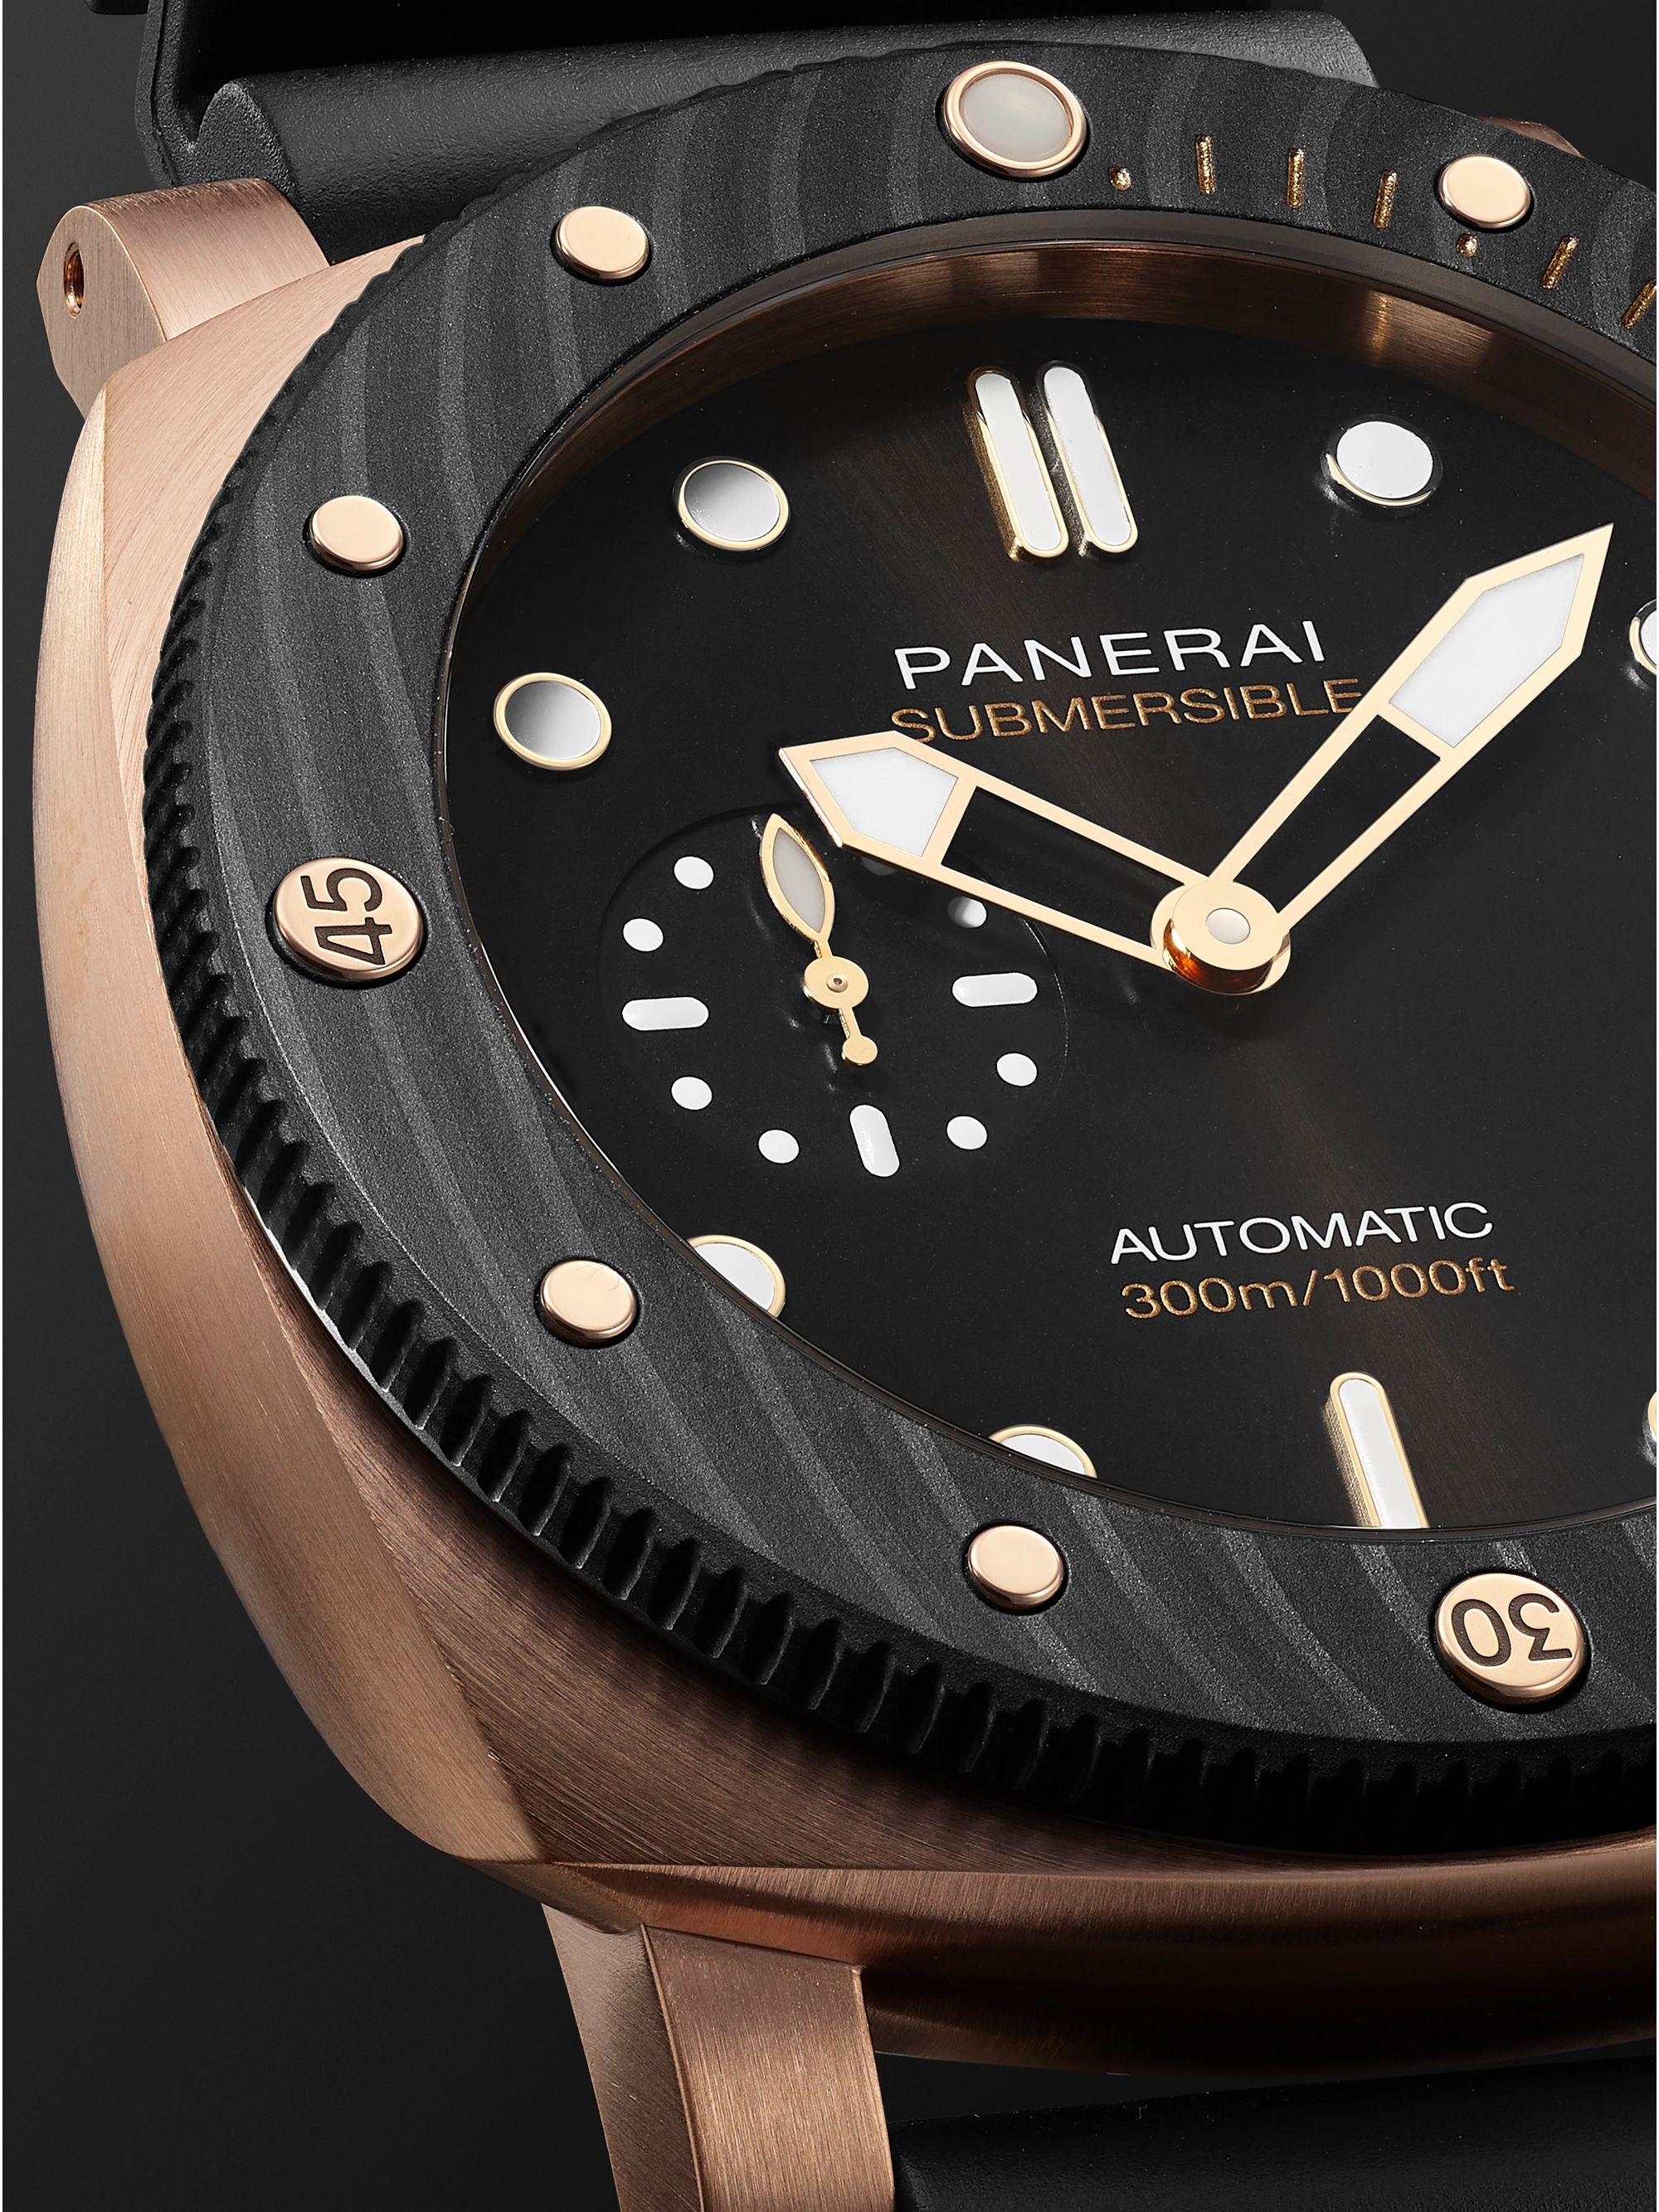 PANERAI Submersible OroCarbo Automatic 44mm Goldtech and Rubber Watch, Ref. No. PAM01070